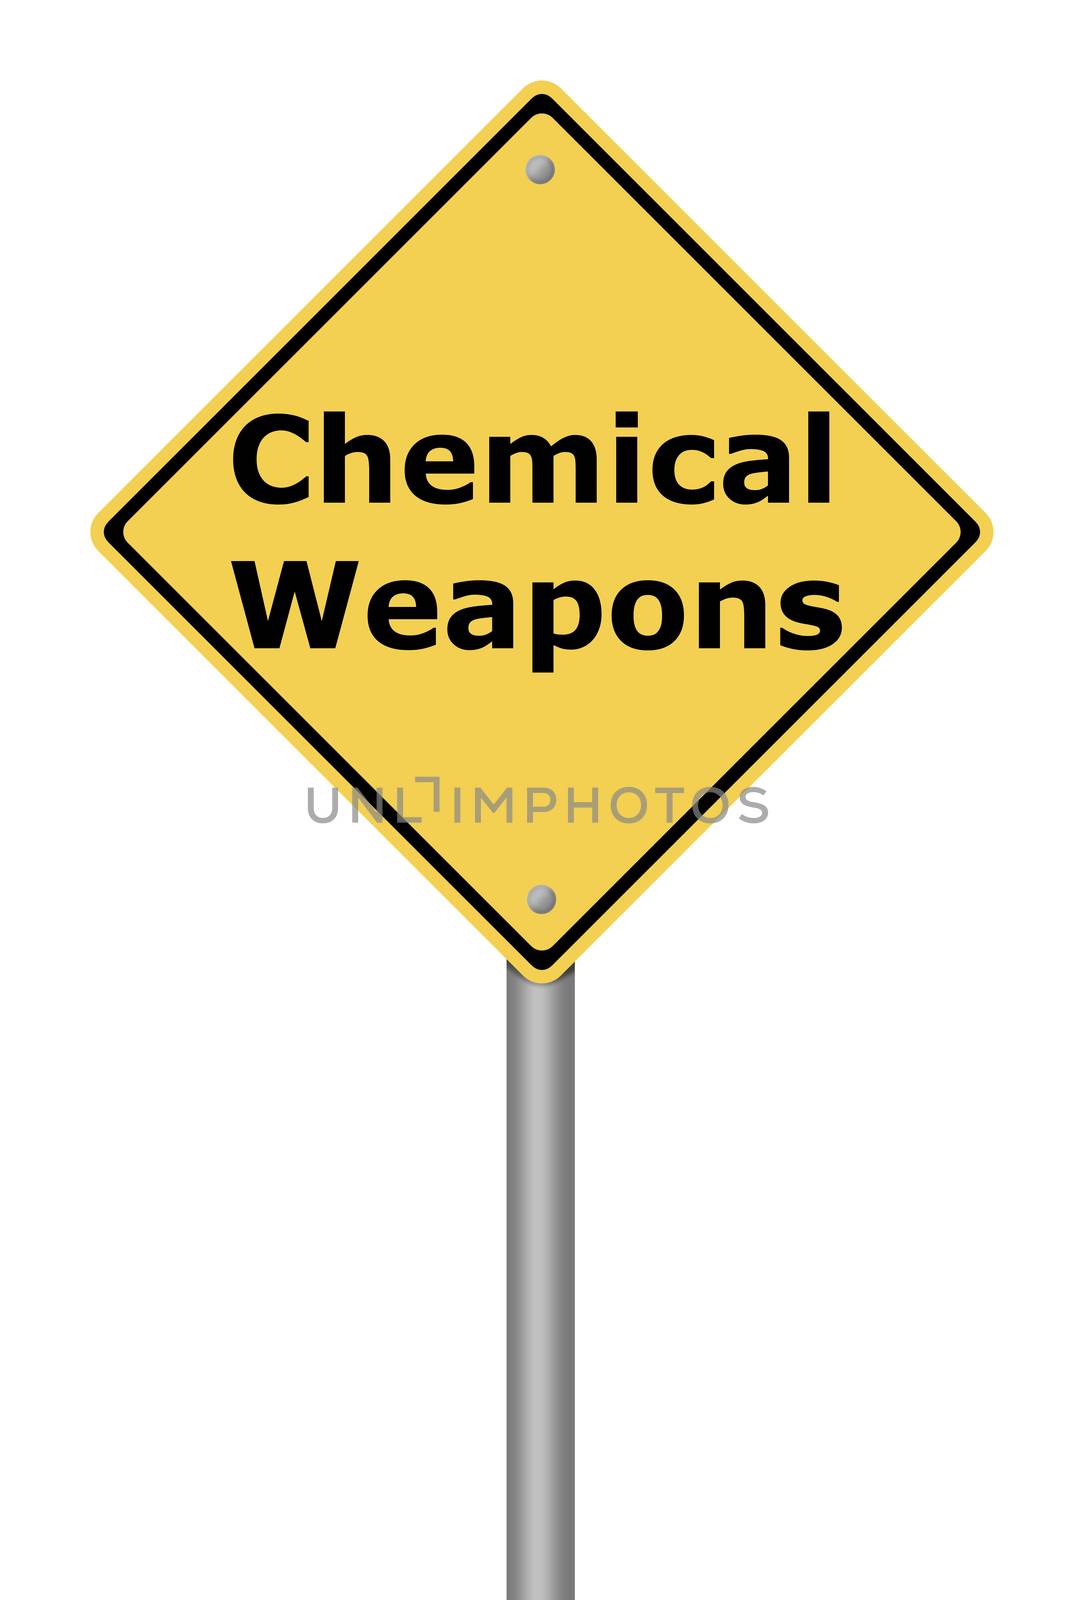 Yellow warning sign with the text Chemical Weapons.